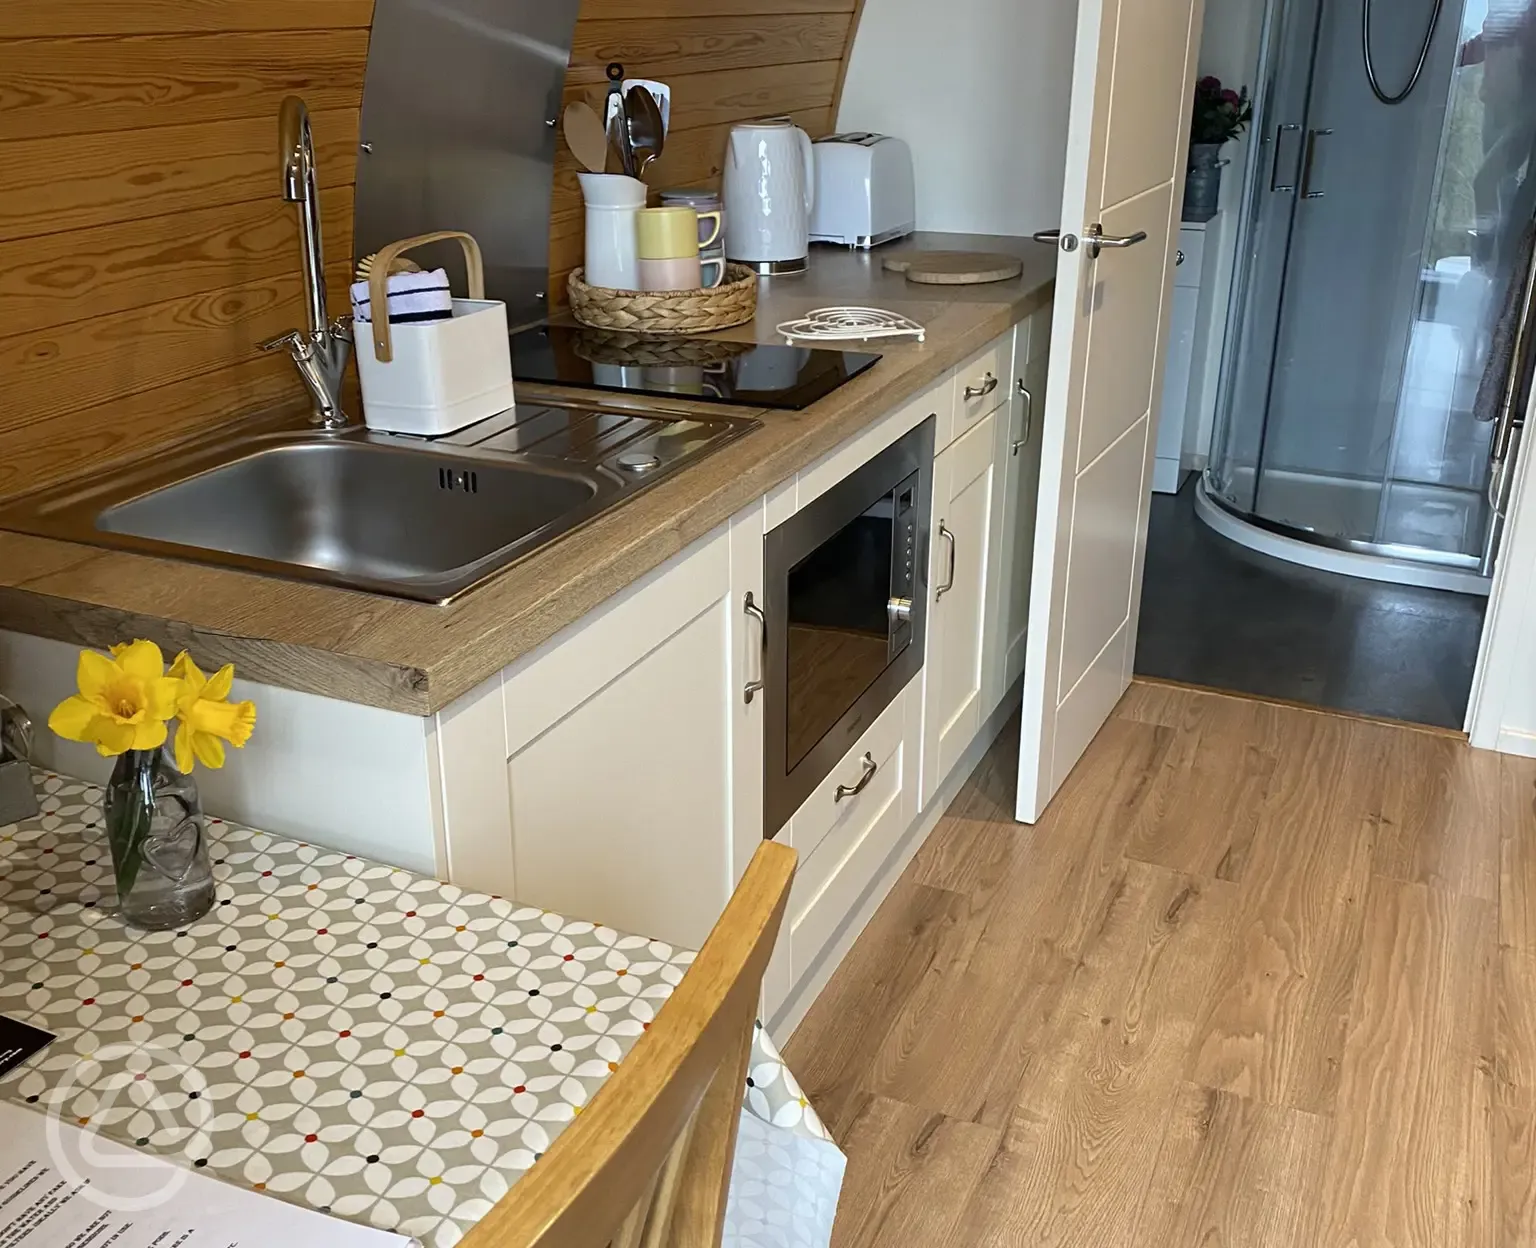 Glamping pod kitchen area and ensuite